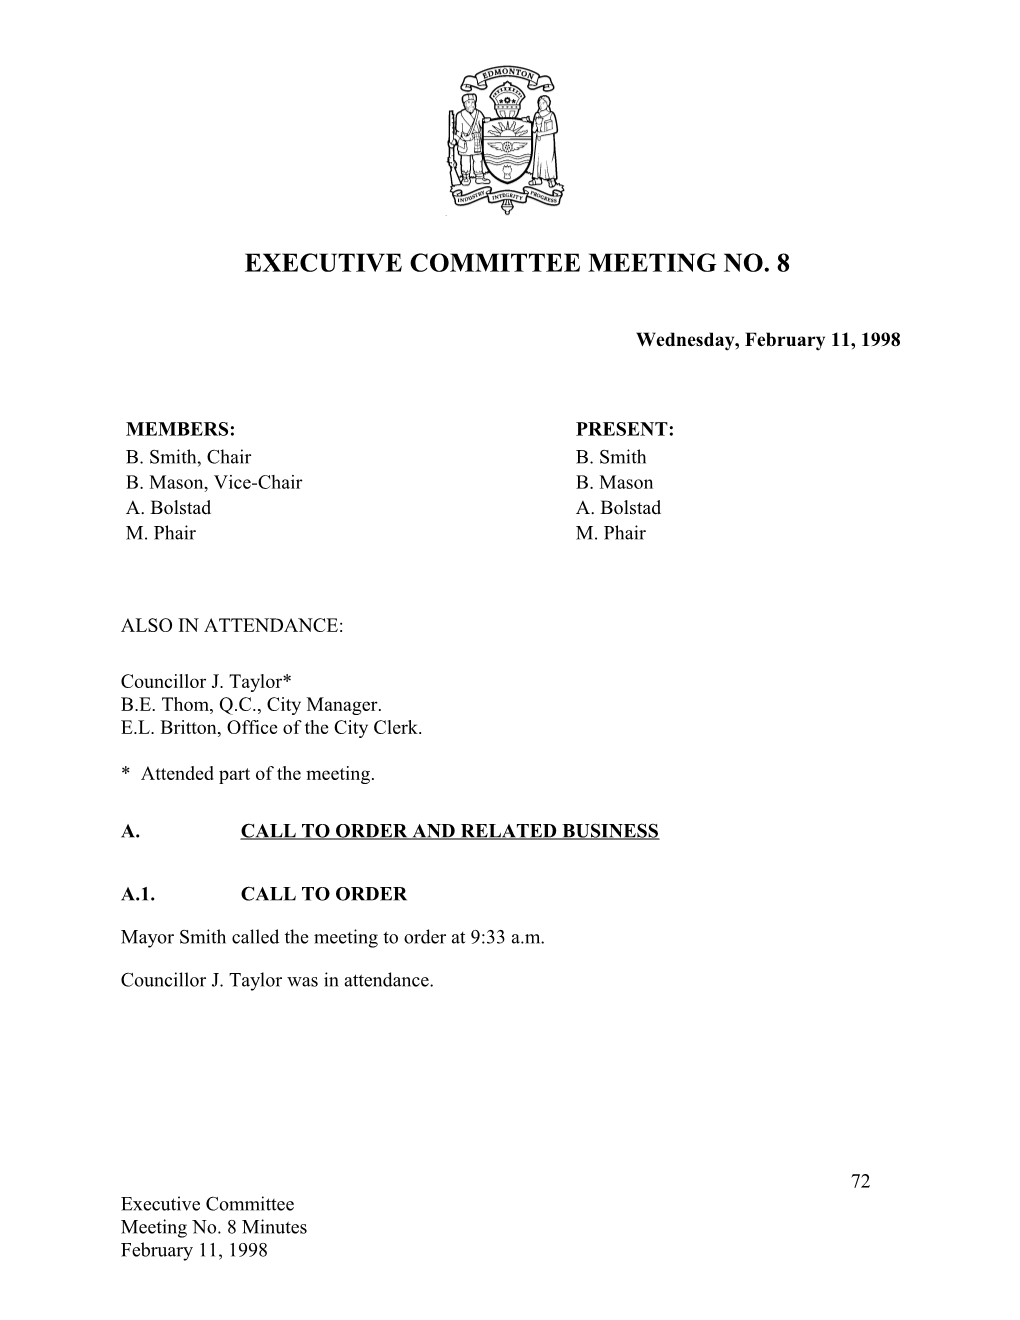 Minutes for Executive Committee February 11, 1998 Meeting